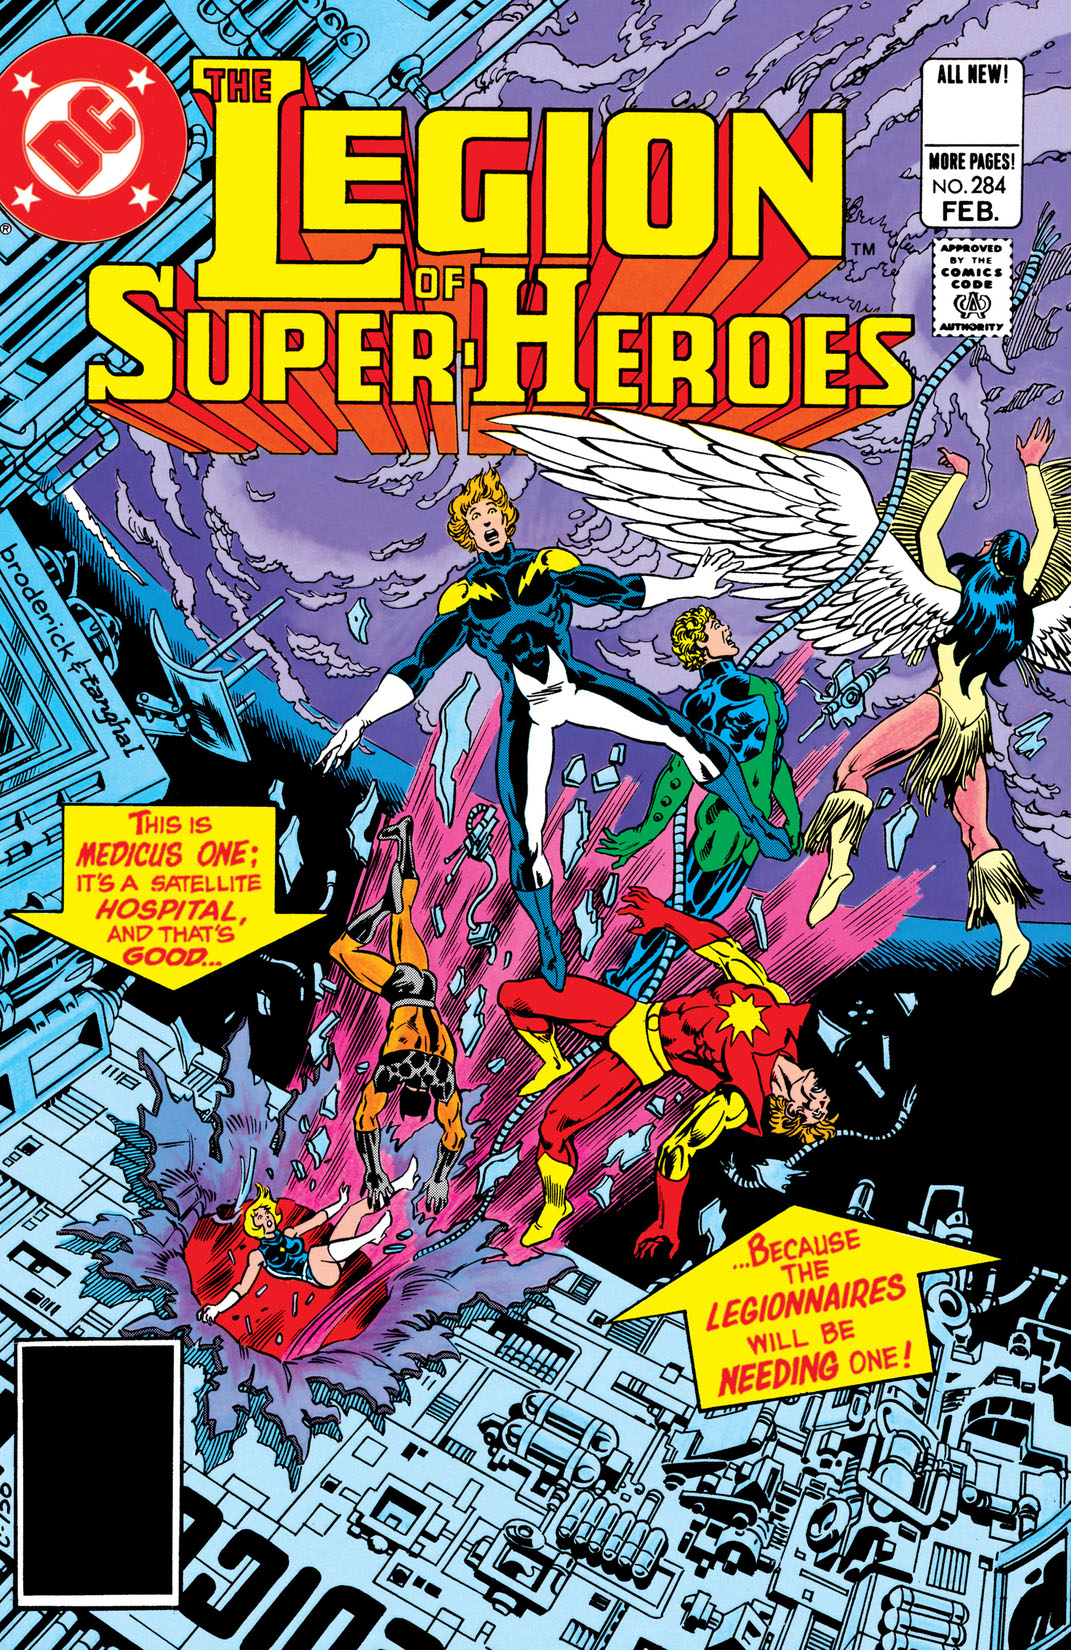 The Legion of Super-Heroes (1980-) #284 preview images